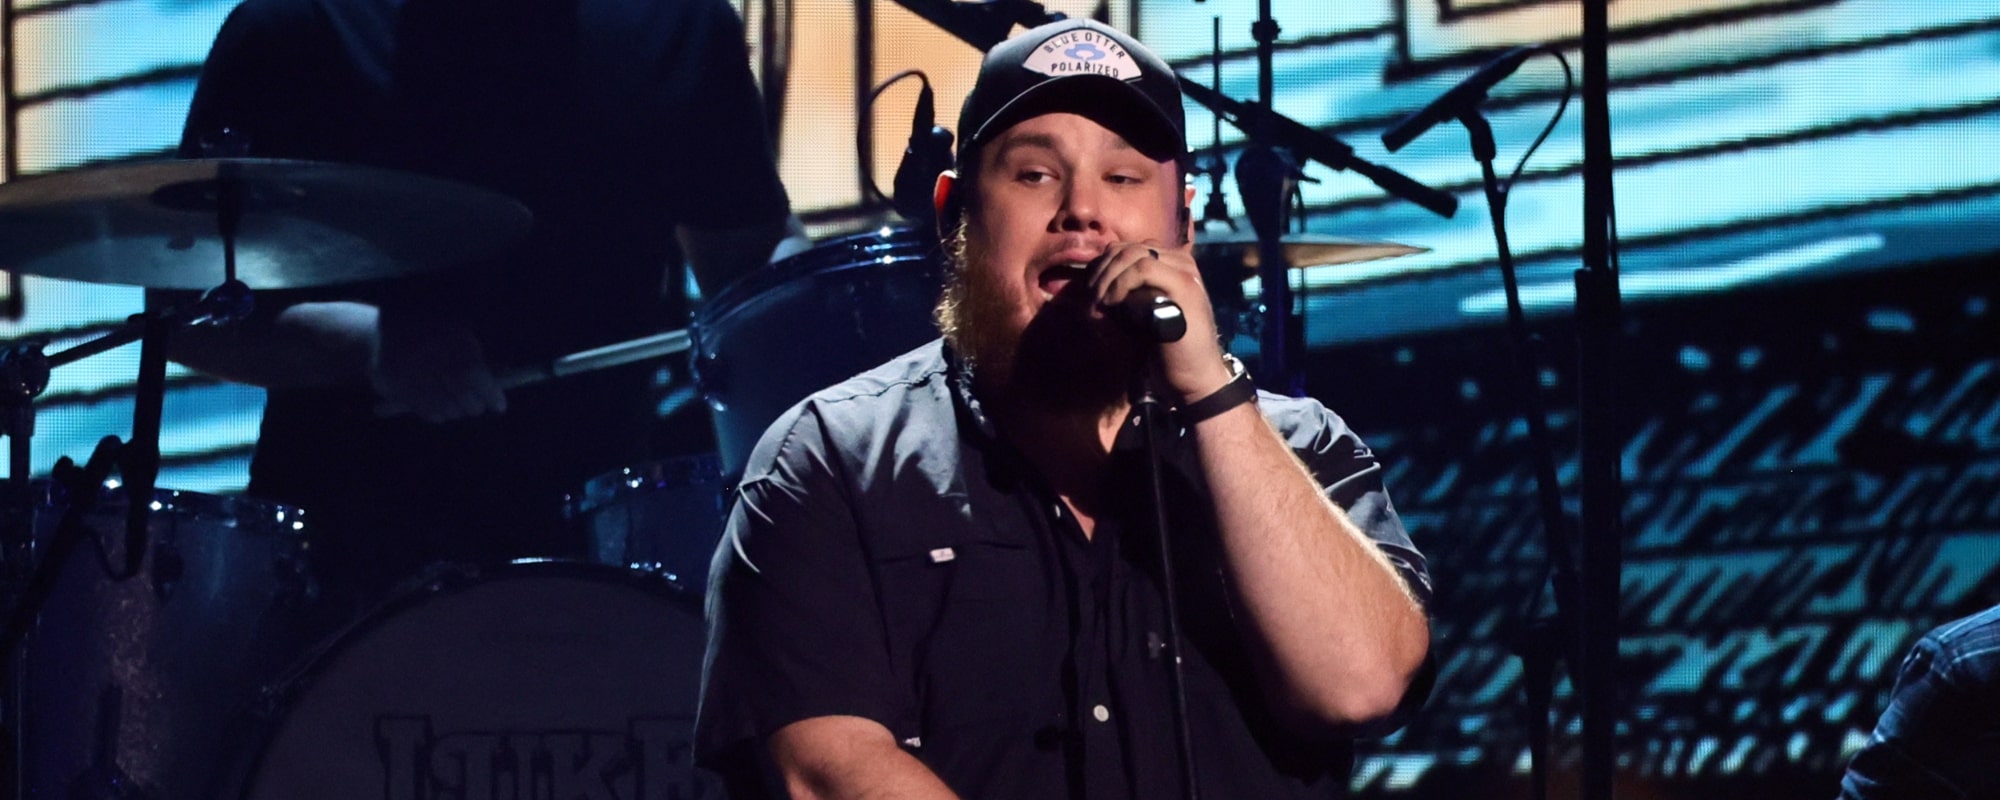 Look: Luke Combs Reveals He’s Back in the Studio After Sharing Unreleased Songs on Social Media